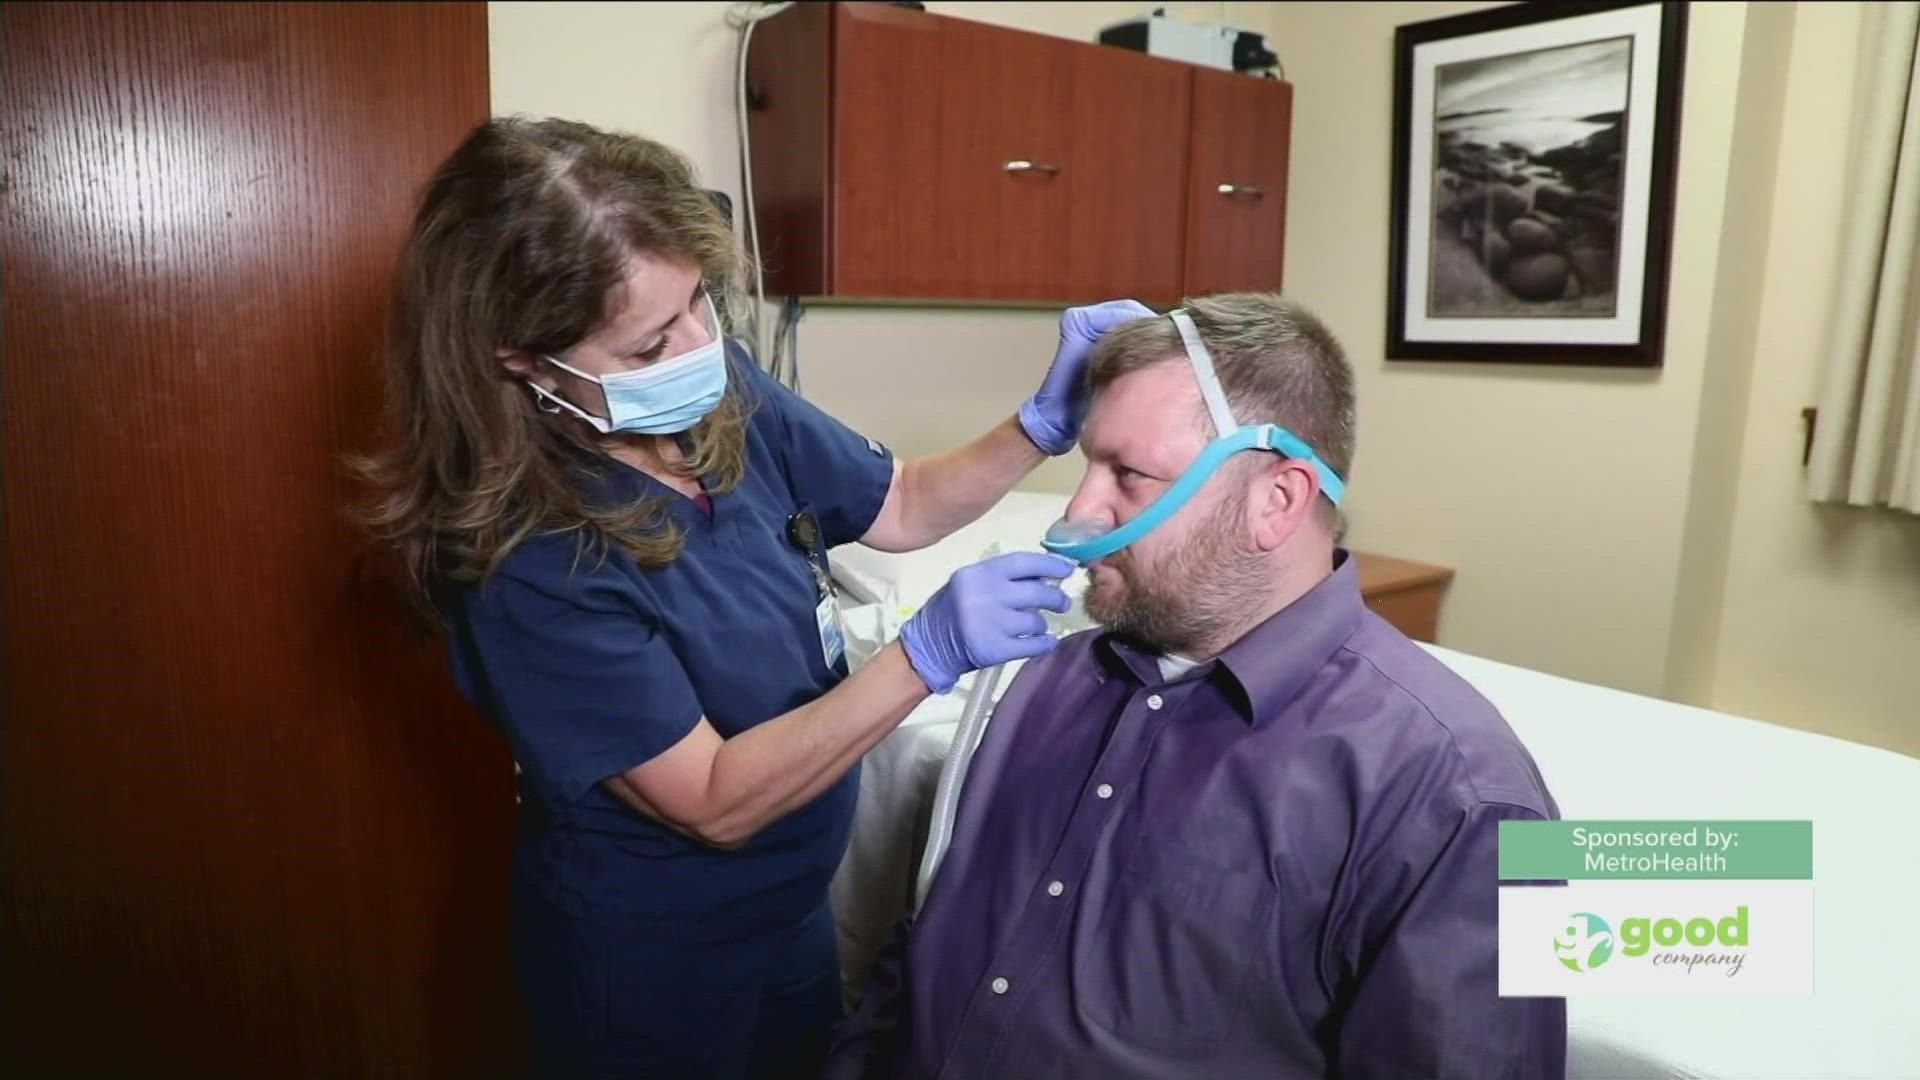 Joe is speaking with Dr. John Carter about treatments for sleep apnea.